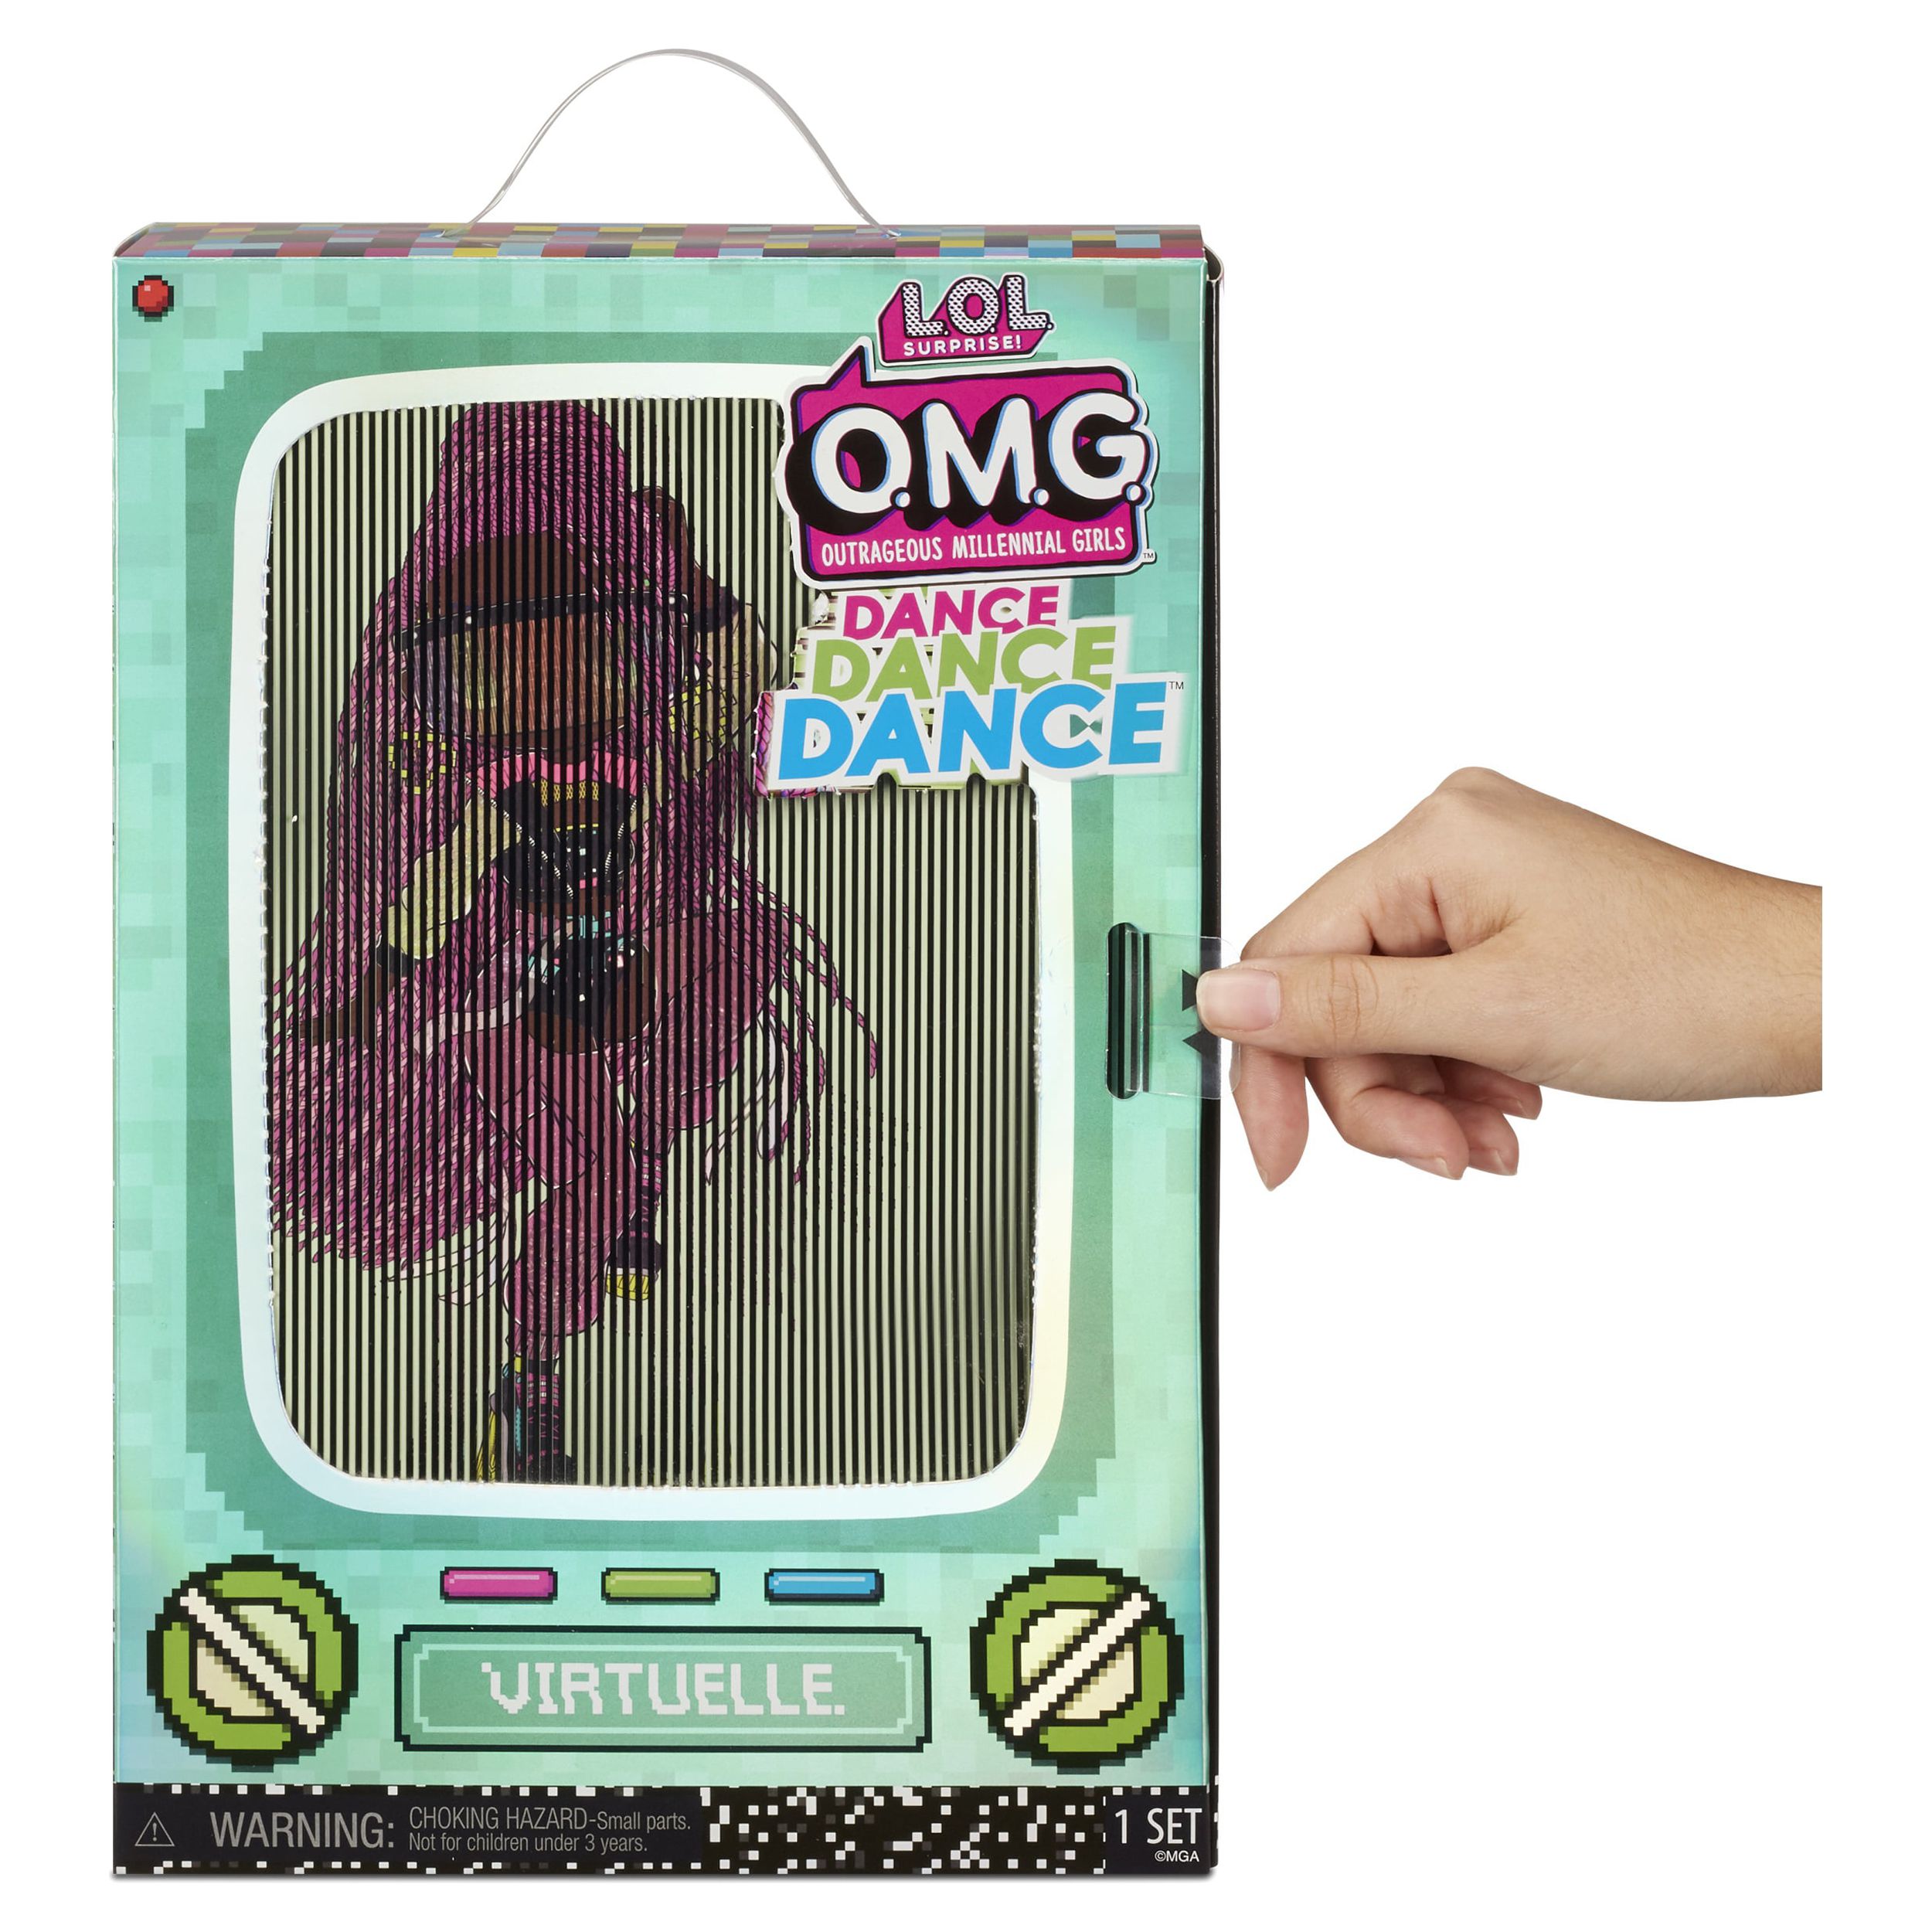 LOL Surprise OMG Dance Dance Dance Virtuelle Fashion Doll with 15 Surprises Including Magic Blacklight, Shoes, Hair Brush, Doll Stand and TV Package - For Girls Ages 4+ - image 4 of 7